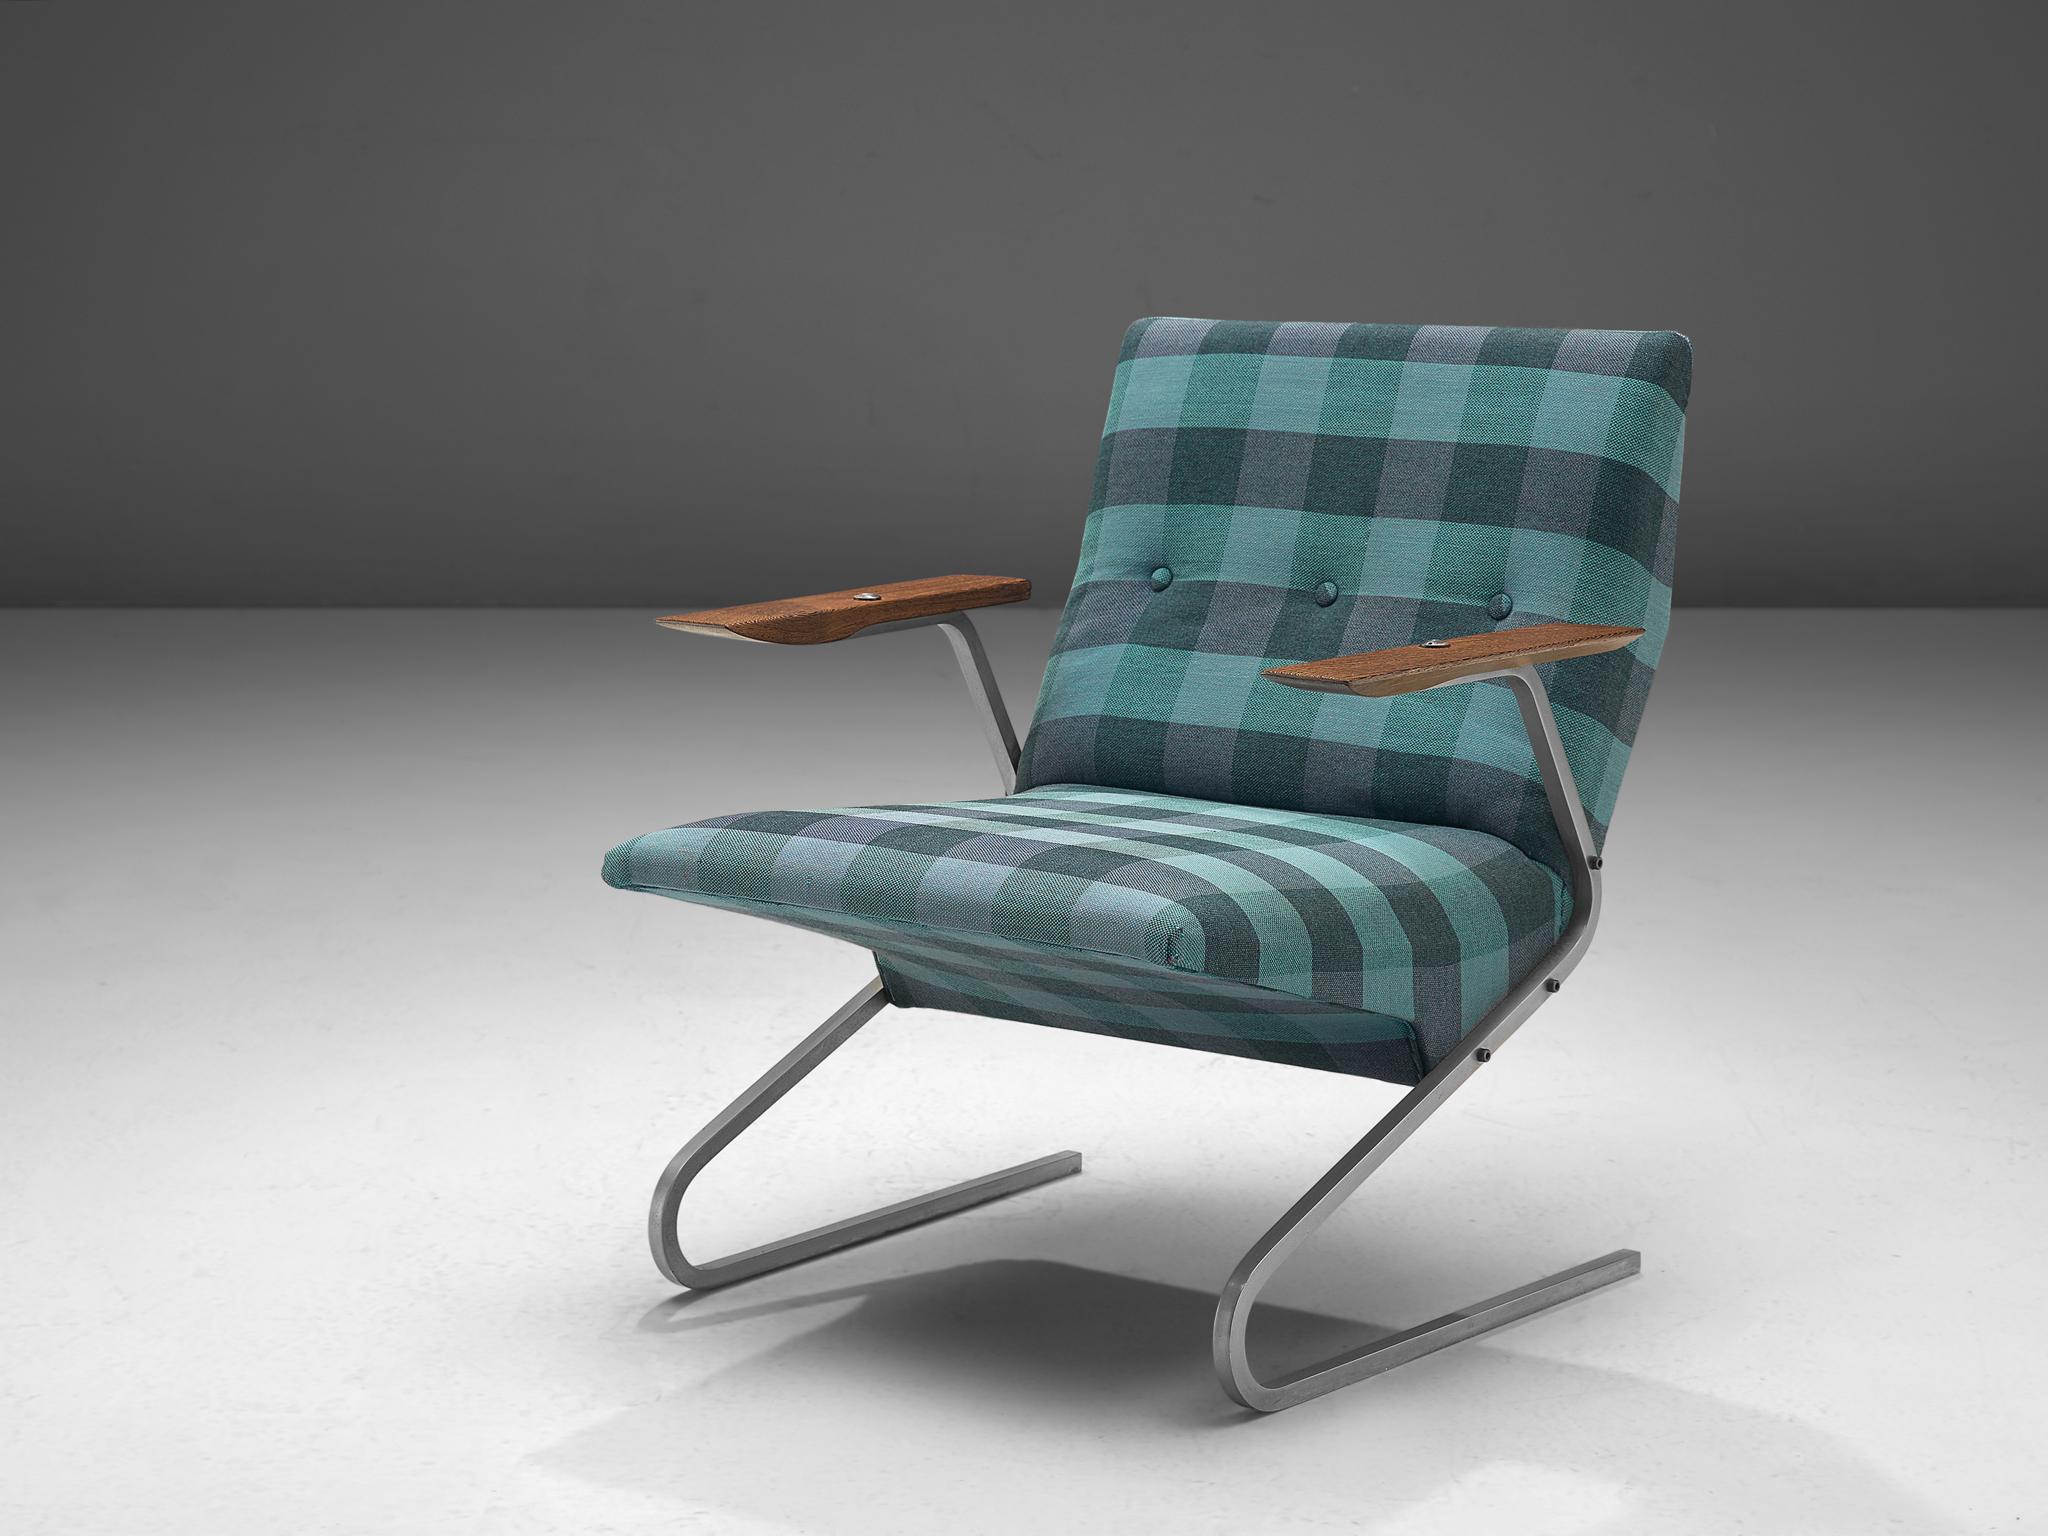 Georges van Rijck for Beaufort, 'Cantilever' lounge chair, fabric, wood and steel, Belgium, 1970s.

This playful 'Cantilever' armchair is designed by Georges van Rijck. The chair shows sharp lines and an angled, floating seat. The S-shaped frame